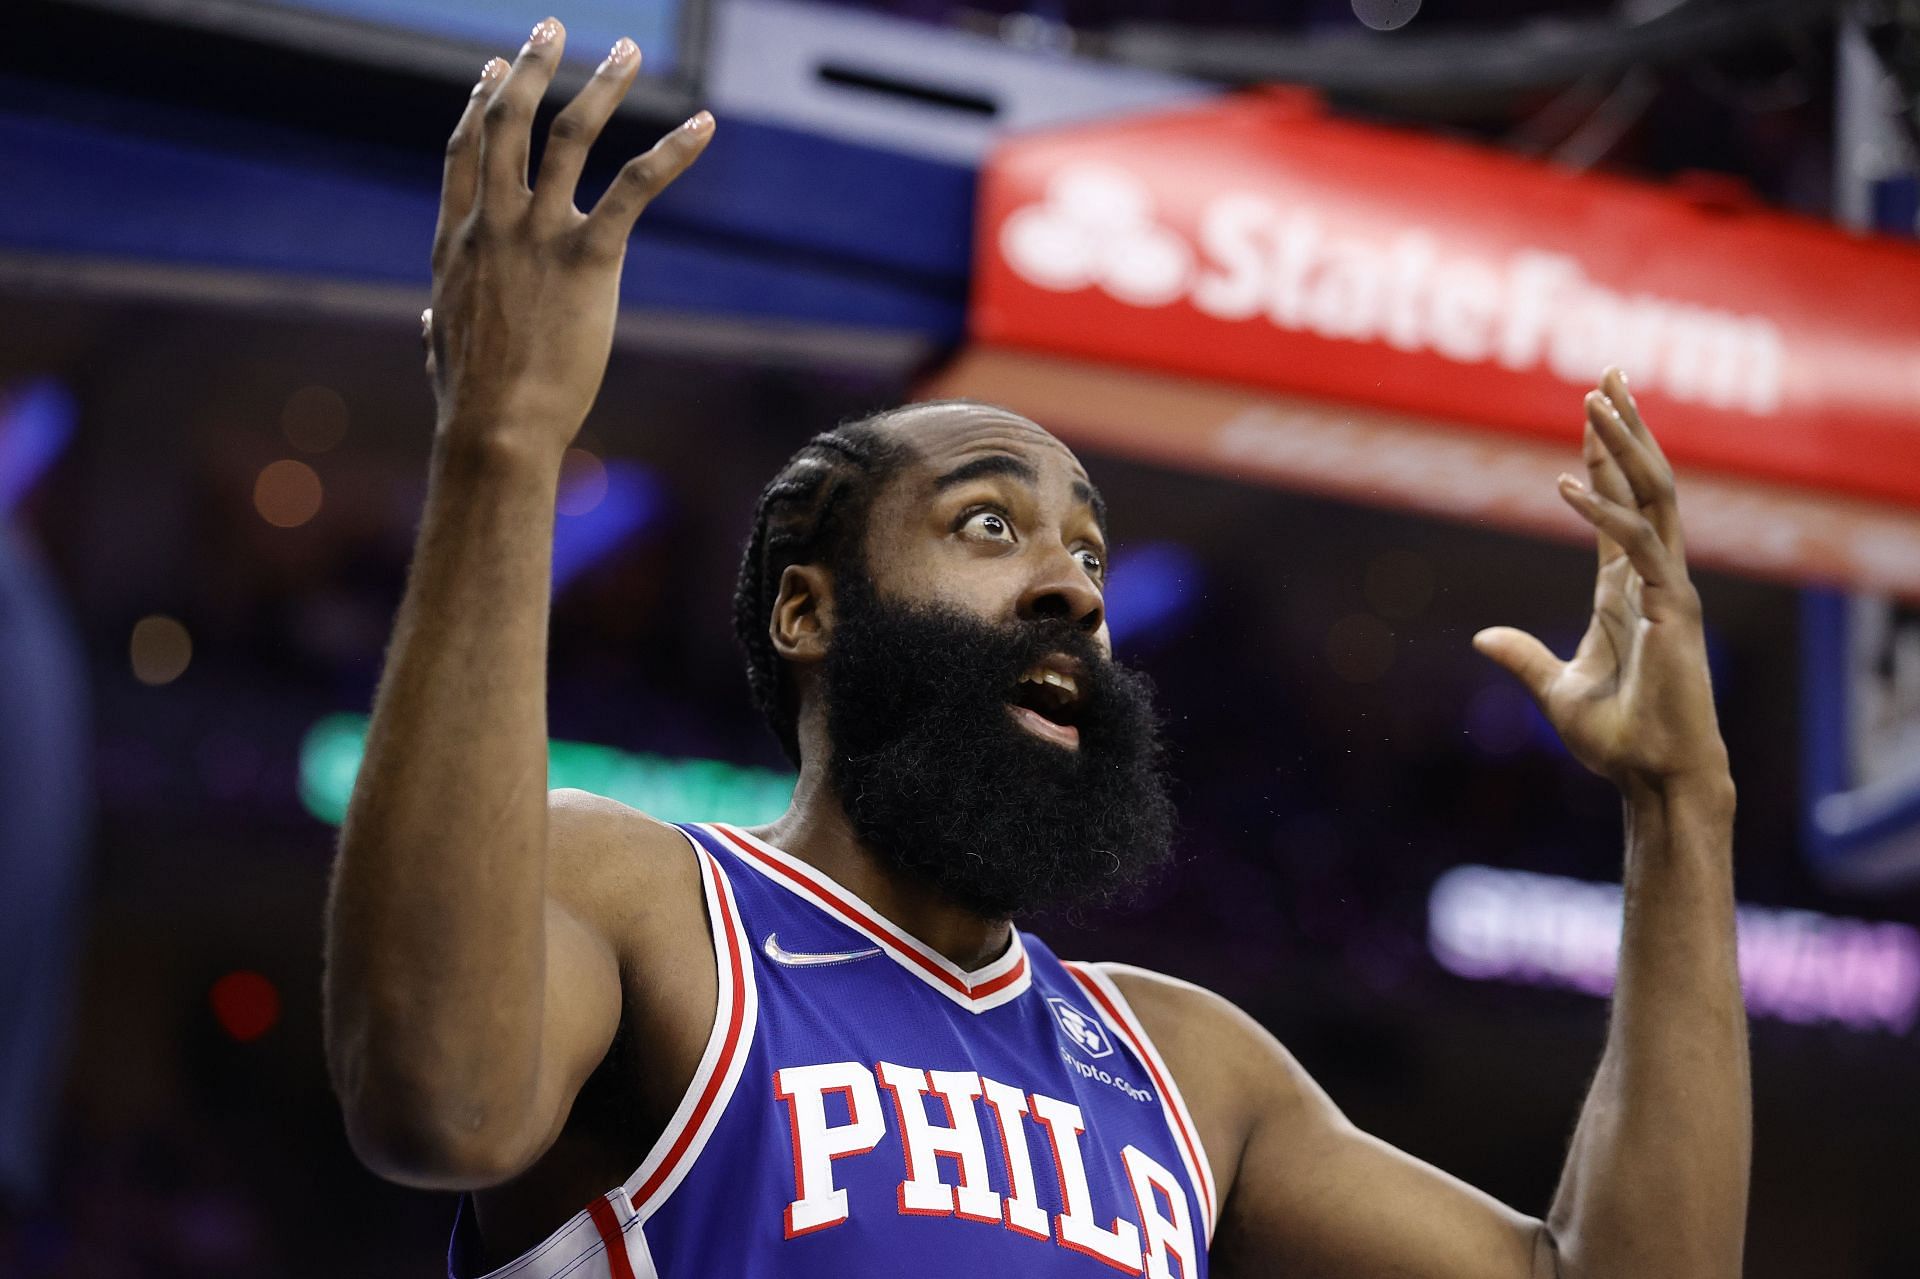 Harden and the 76ers are off to a strong start in the NBA playoffs.